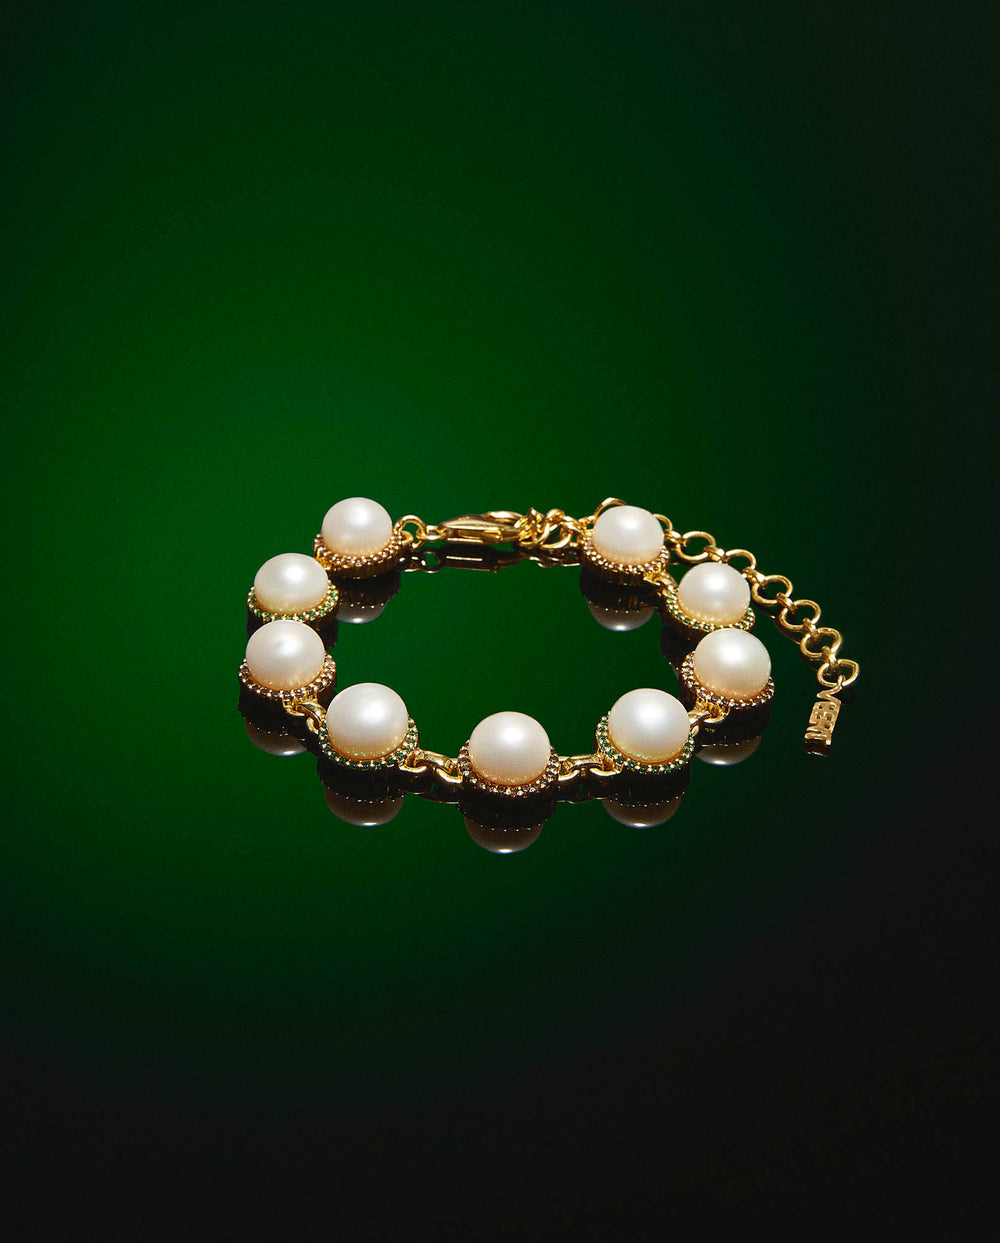 The Royal Bracelet in Yellow Gold